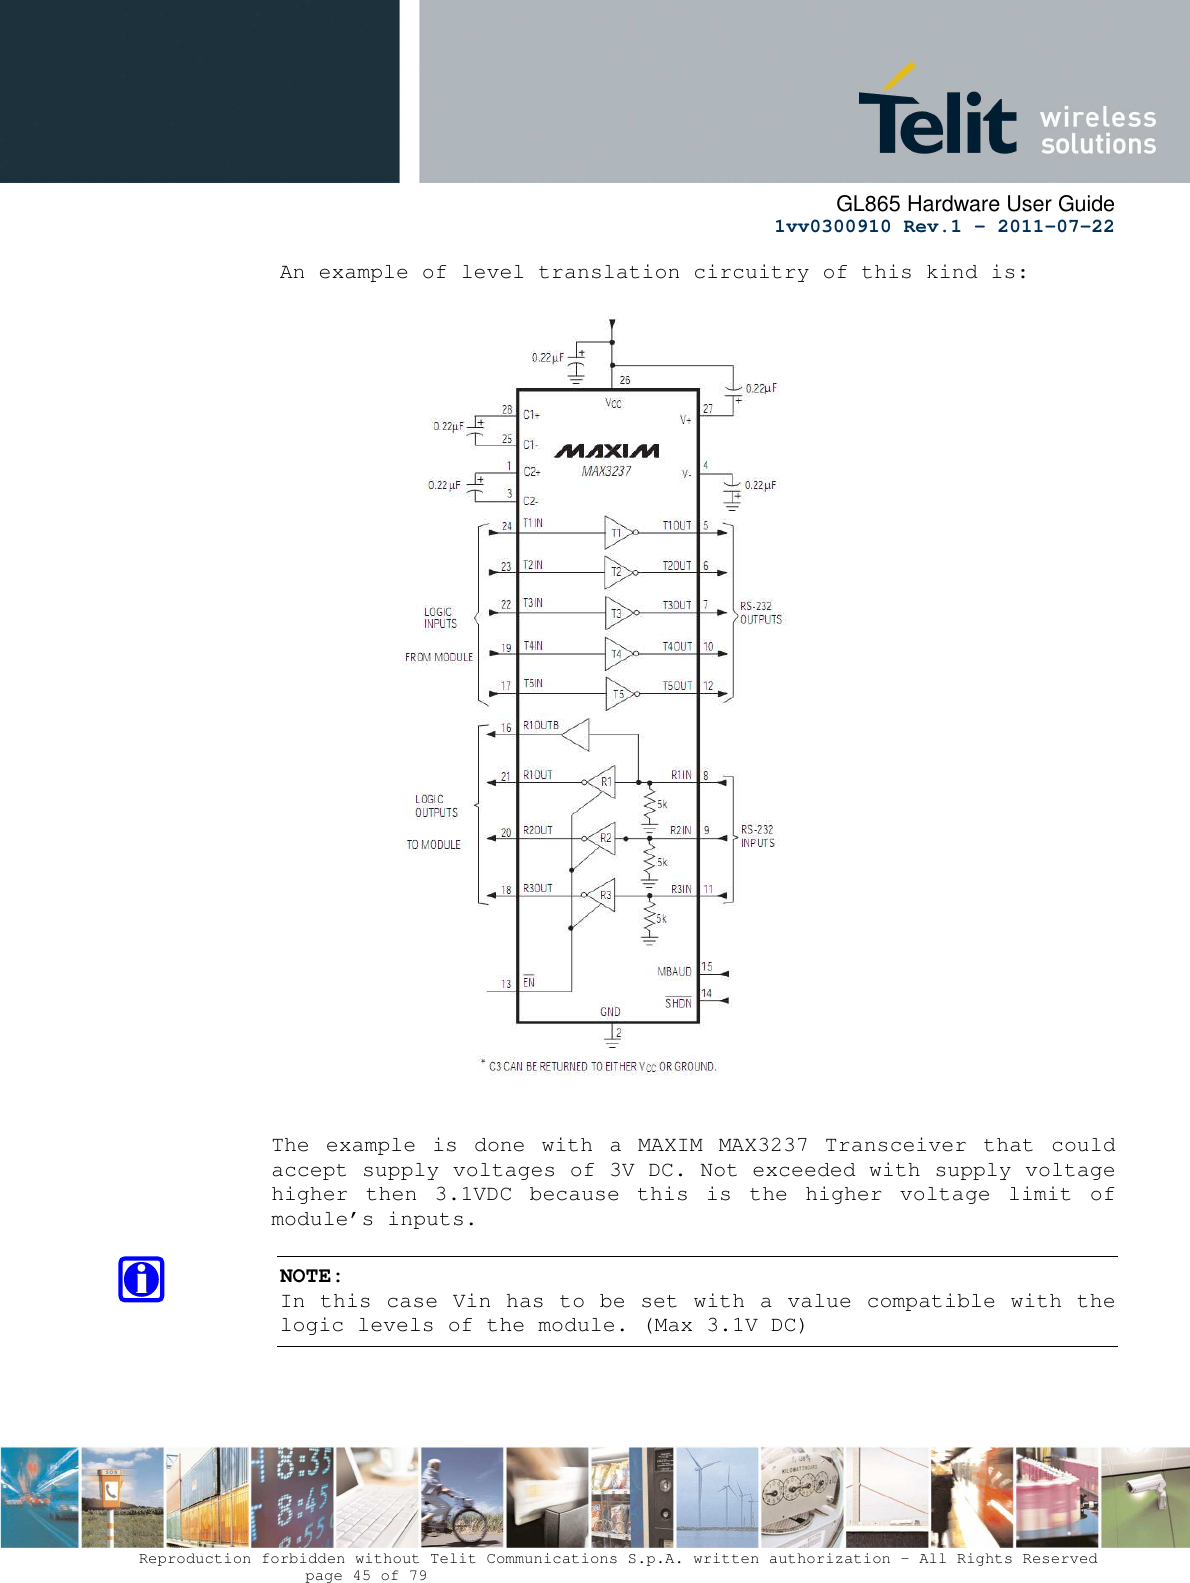      GL865 Hardware User Guide     1vv0300910 Rev.1 – 2011-07-22       Reproduction forbidden without Telit Communications S.p.A. written authorization - All Rights Reserved    page 45 of 79  An example of level translation circuitry of this kind is:     The  example  is done with  a MAXIM  MAX3237 Transceiver  that  could accept supply voltages of 3V DC. Not exceeded with supply voltage higher  then  3.1VDC  because  this  is  the  higher  voltage  limit  of module’s inputs.  NOTE: In this case Vin has to be set with a value compatible with the logic levels of the module. (Max 3.1V DC)  